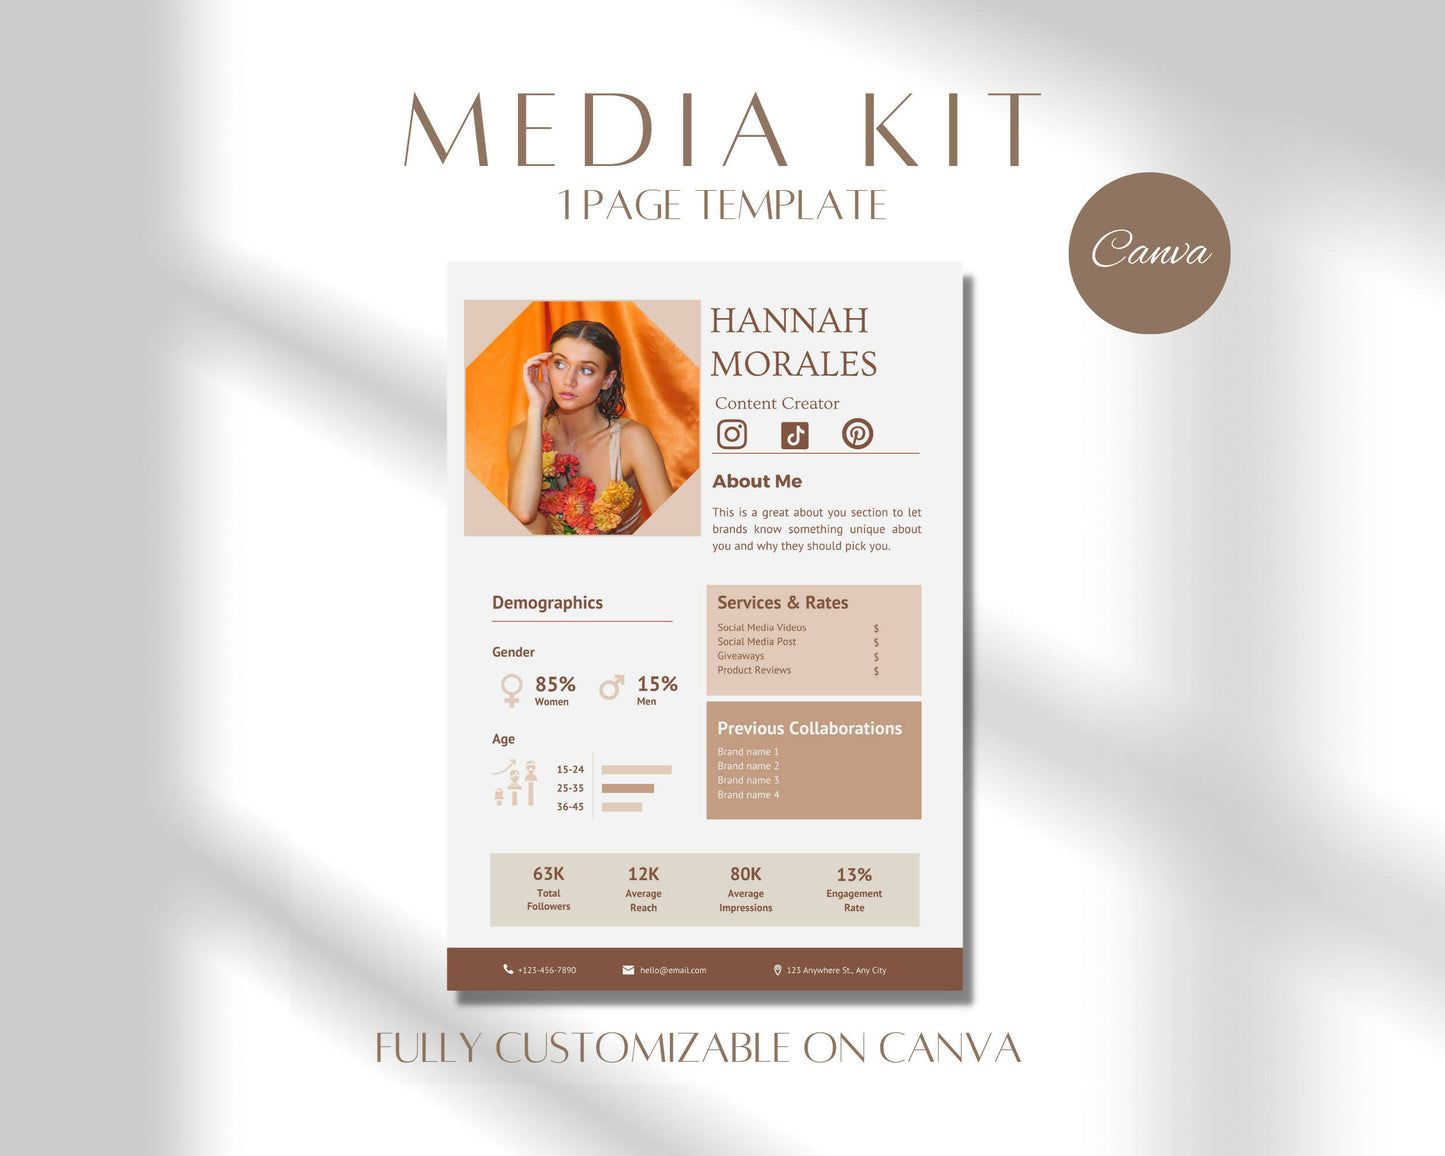 1 Page Instagram Media Press Kit Template for Influencer, Blogger, Small Business